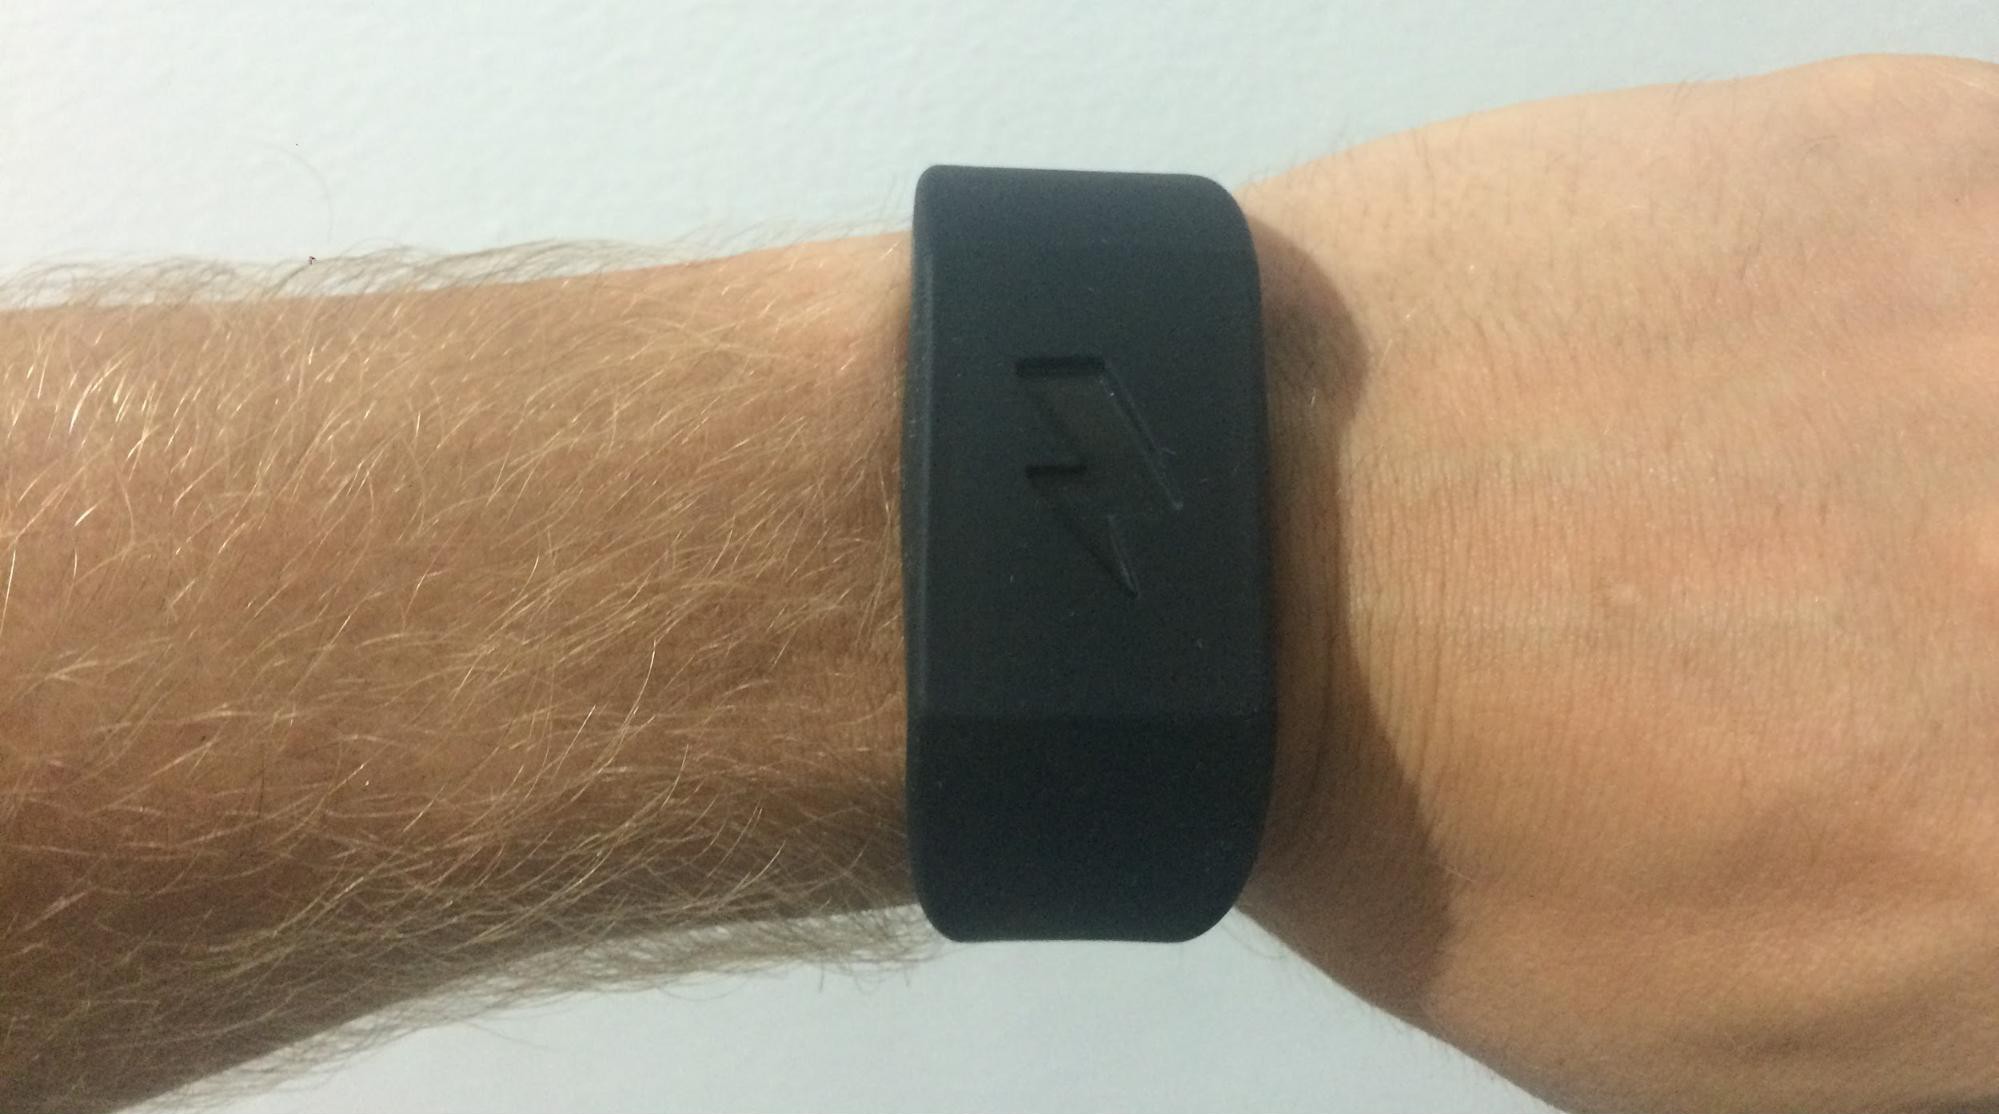 Use Pavlok for some high-tech aversion therapy